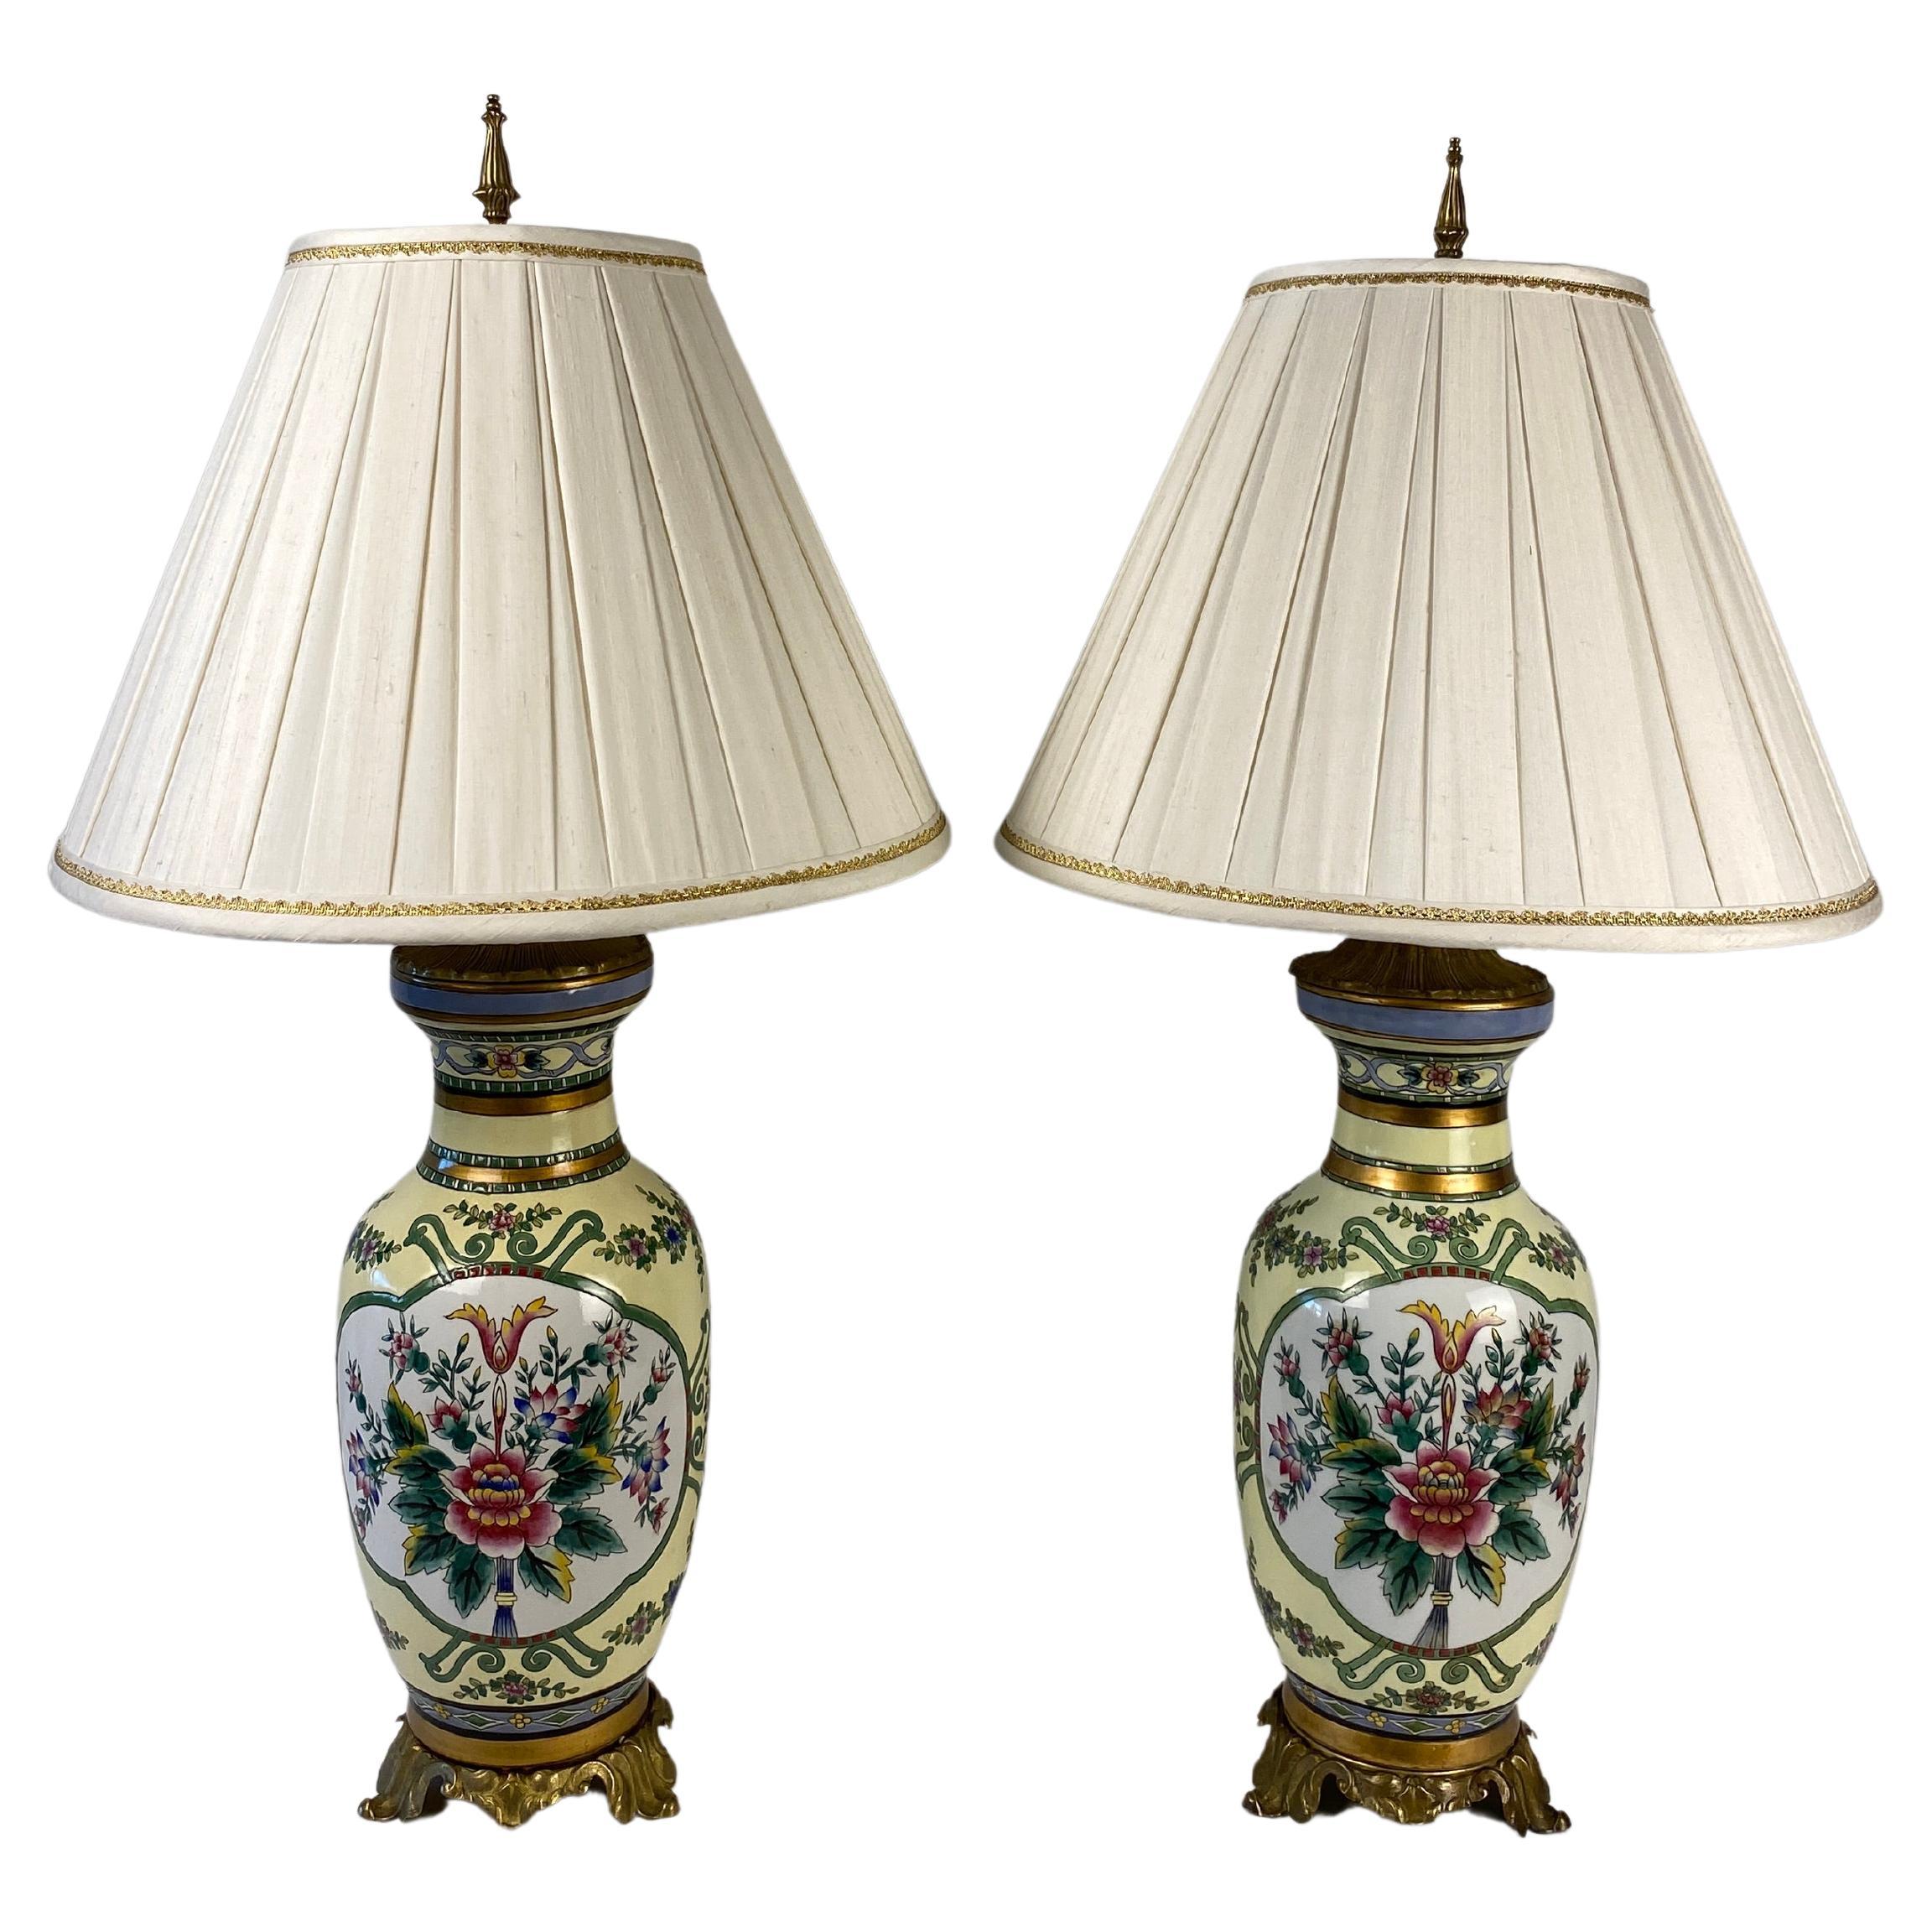 Pair of Hand Painted French Porcelain Gilt Bronze Mounted Table Lamps